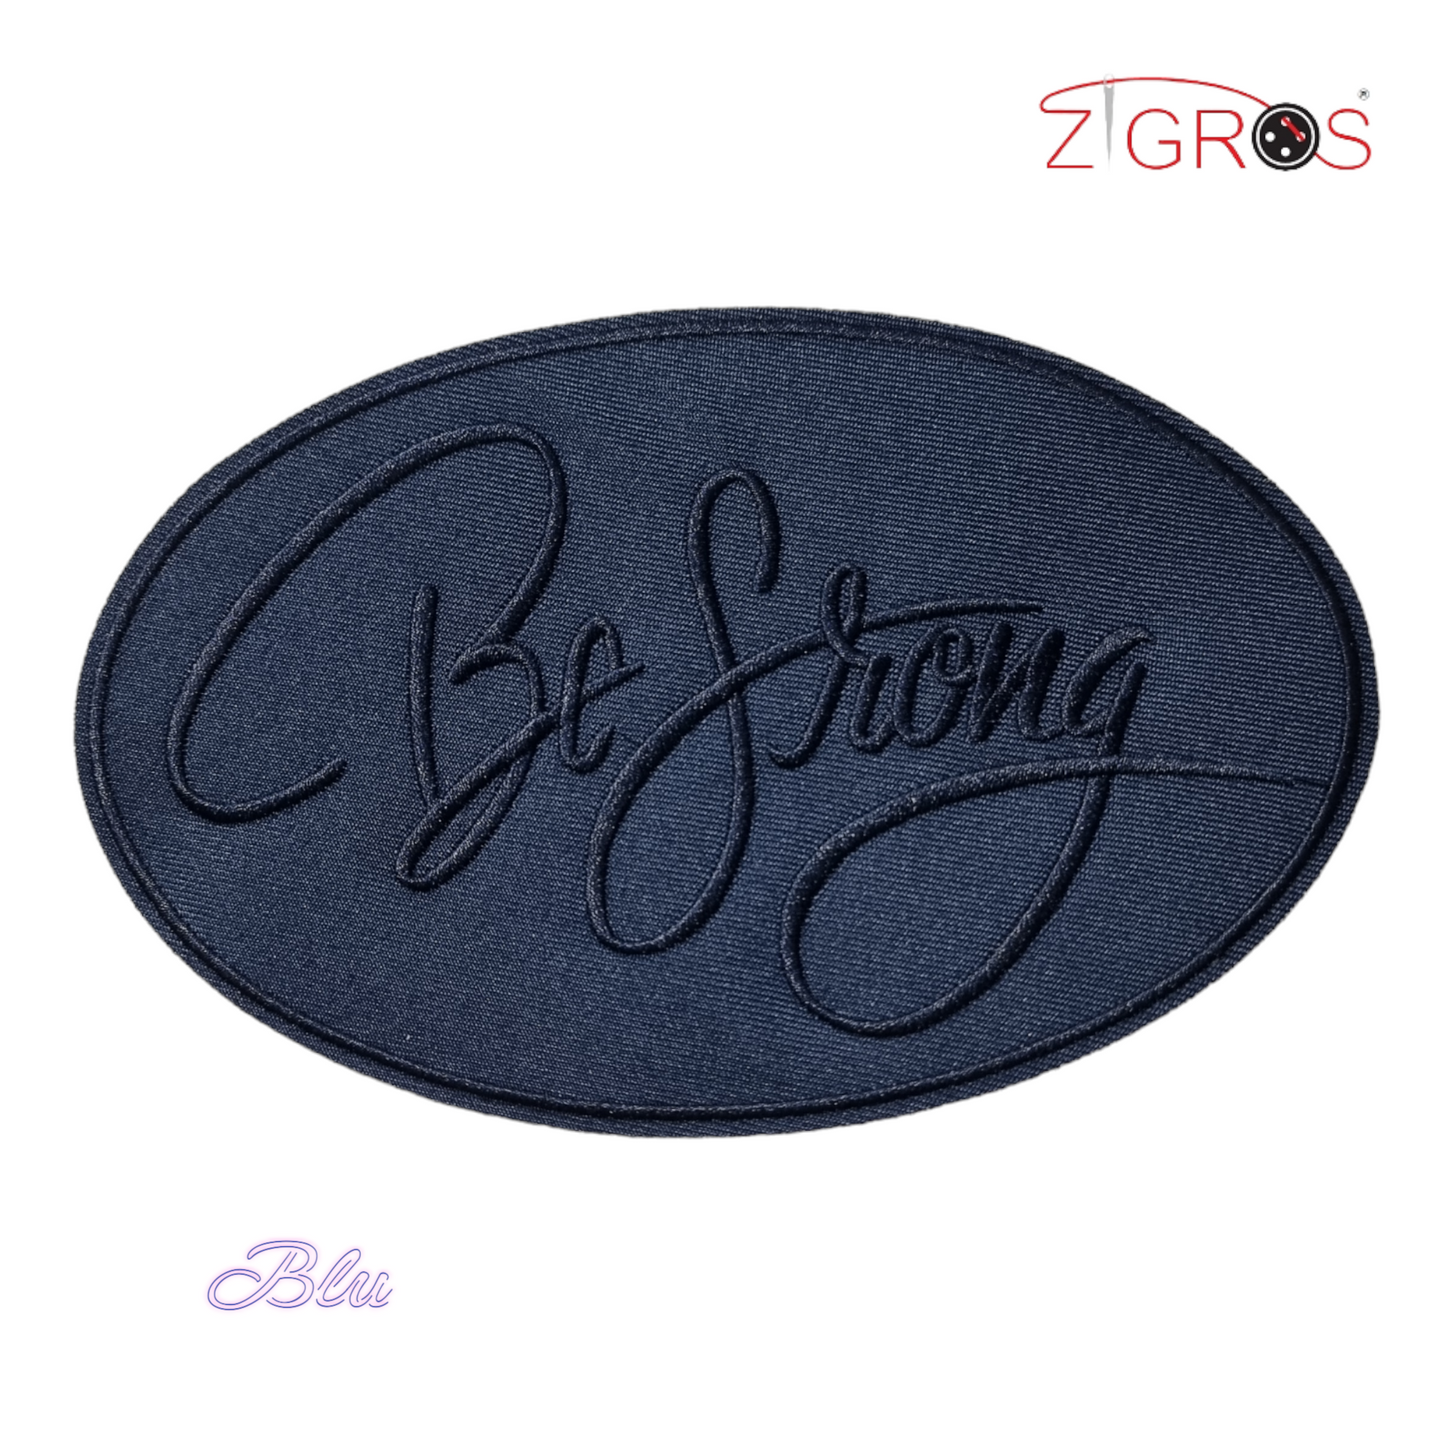 Sport 599/A - Be strong 18x11.5 cm